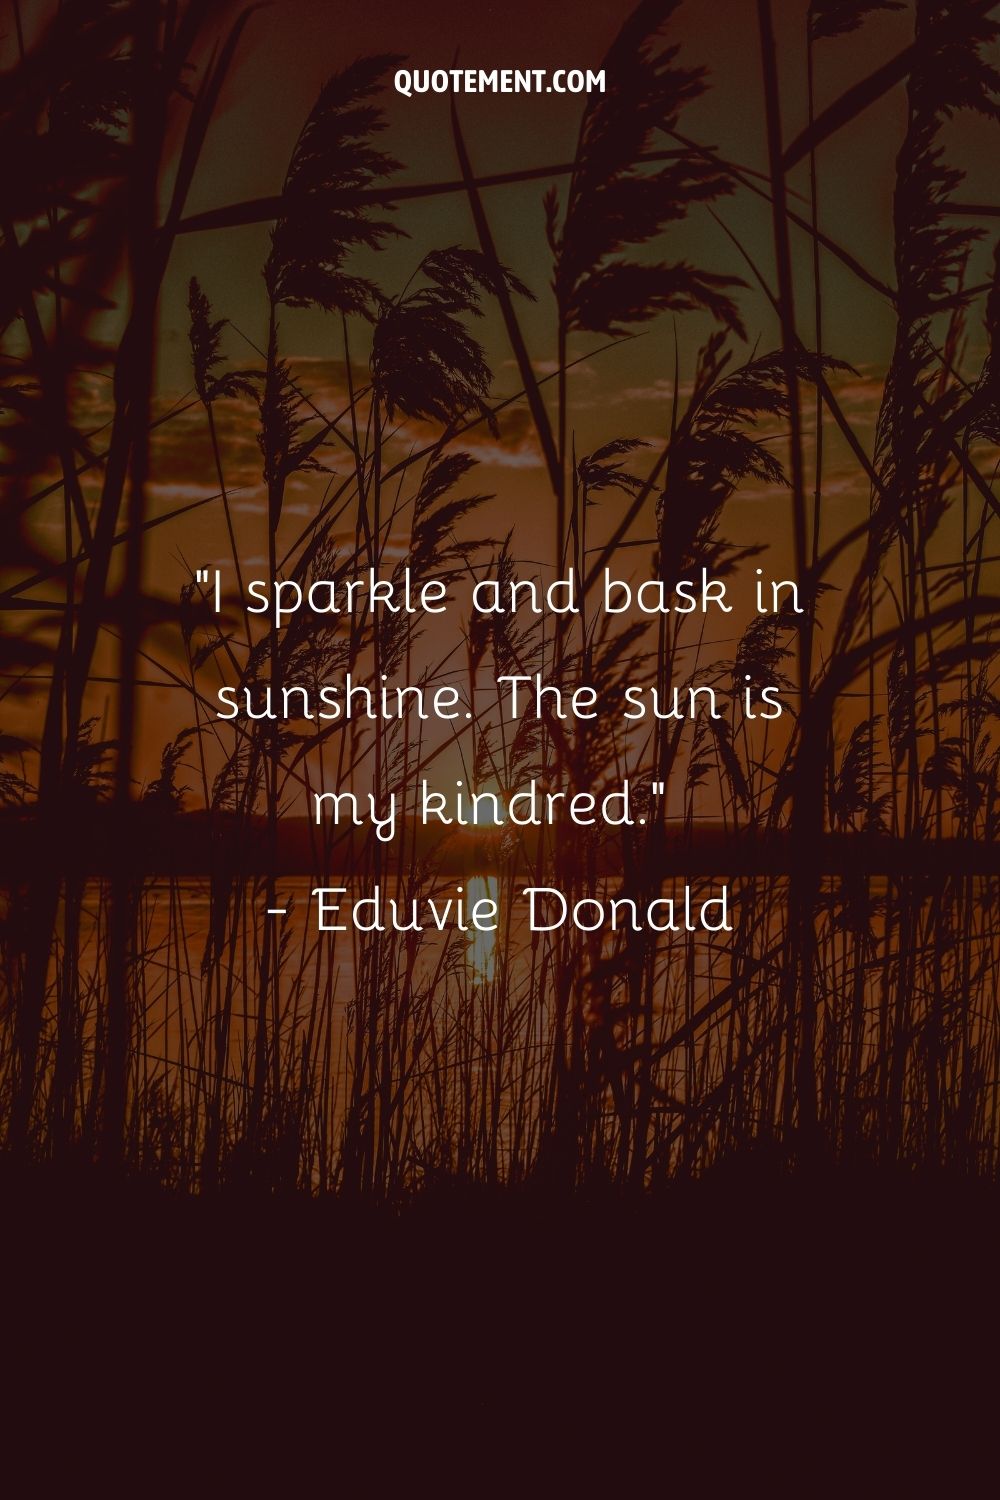 I sparkle and bask in sunshine. The sun is my kindred